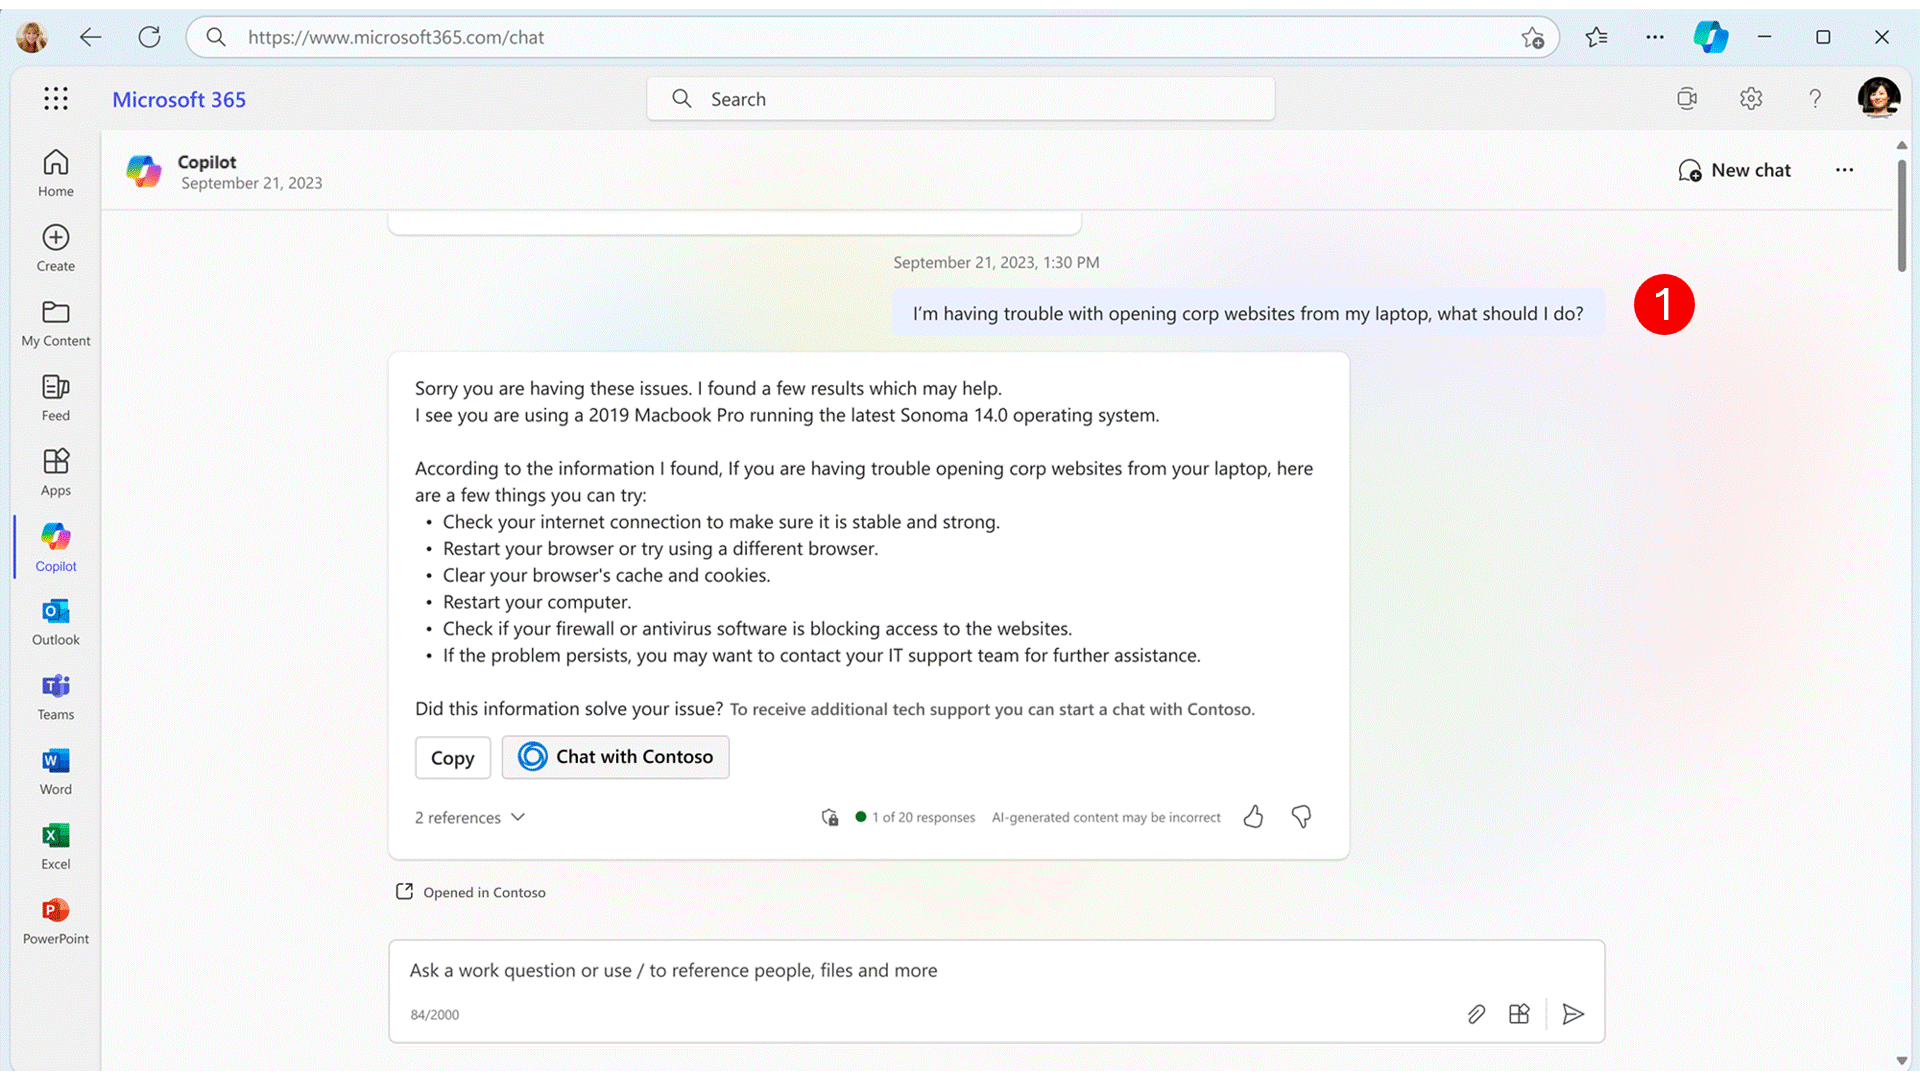 The GIF shows the conversation handoff between the copilot for Microsoft 365 and the Contoso chat bot.